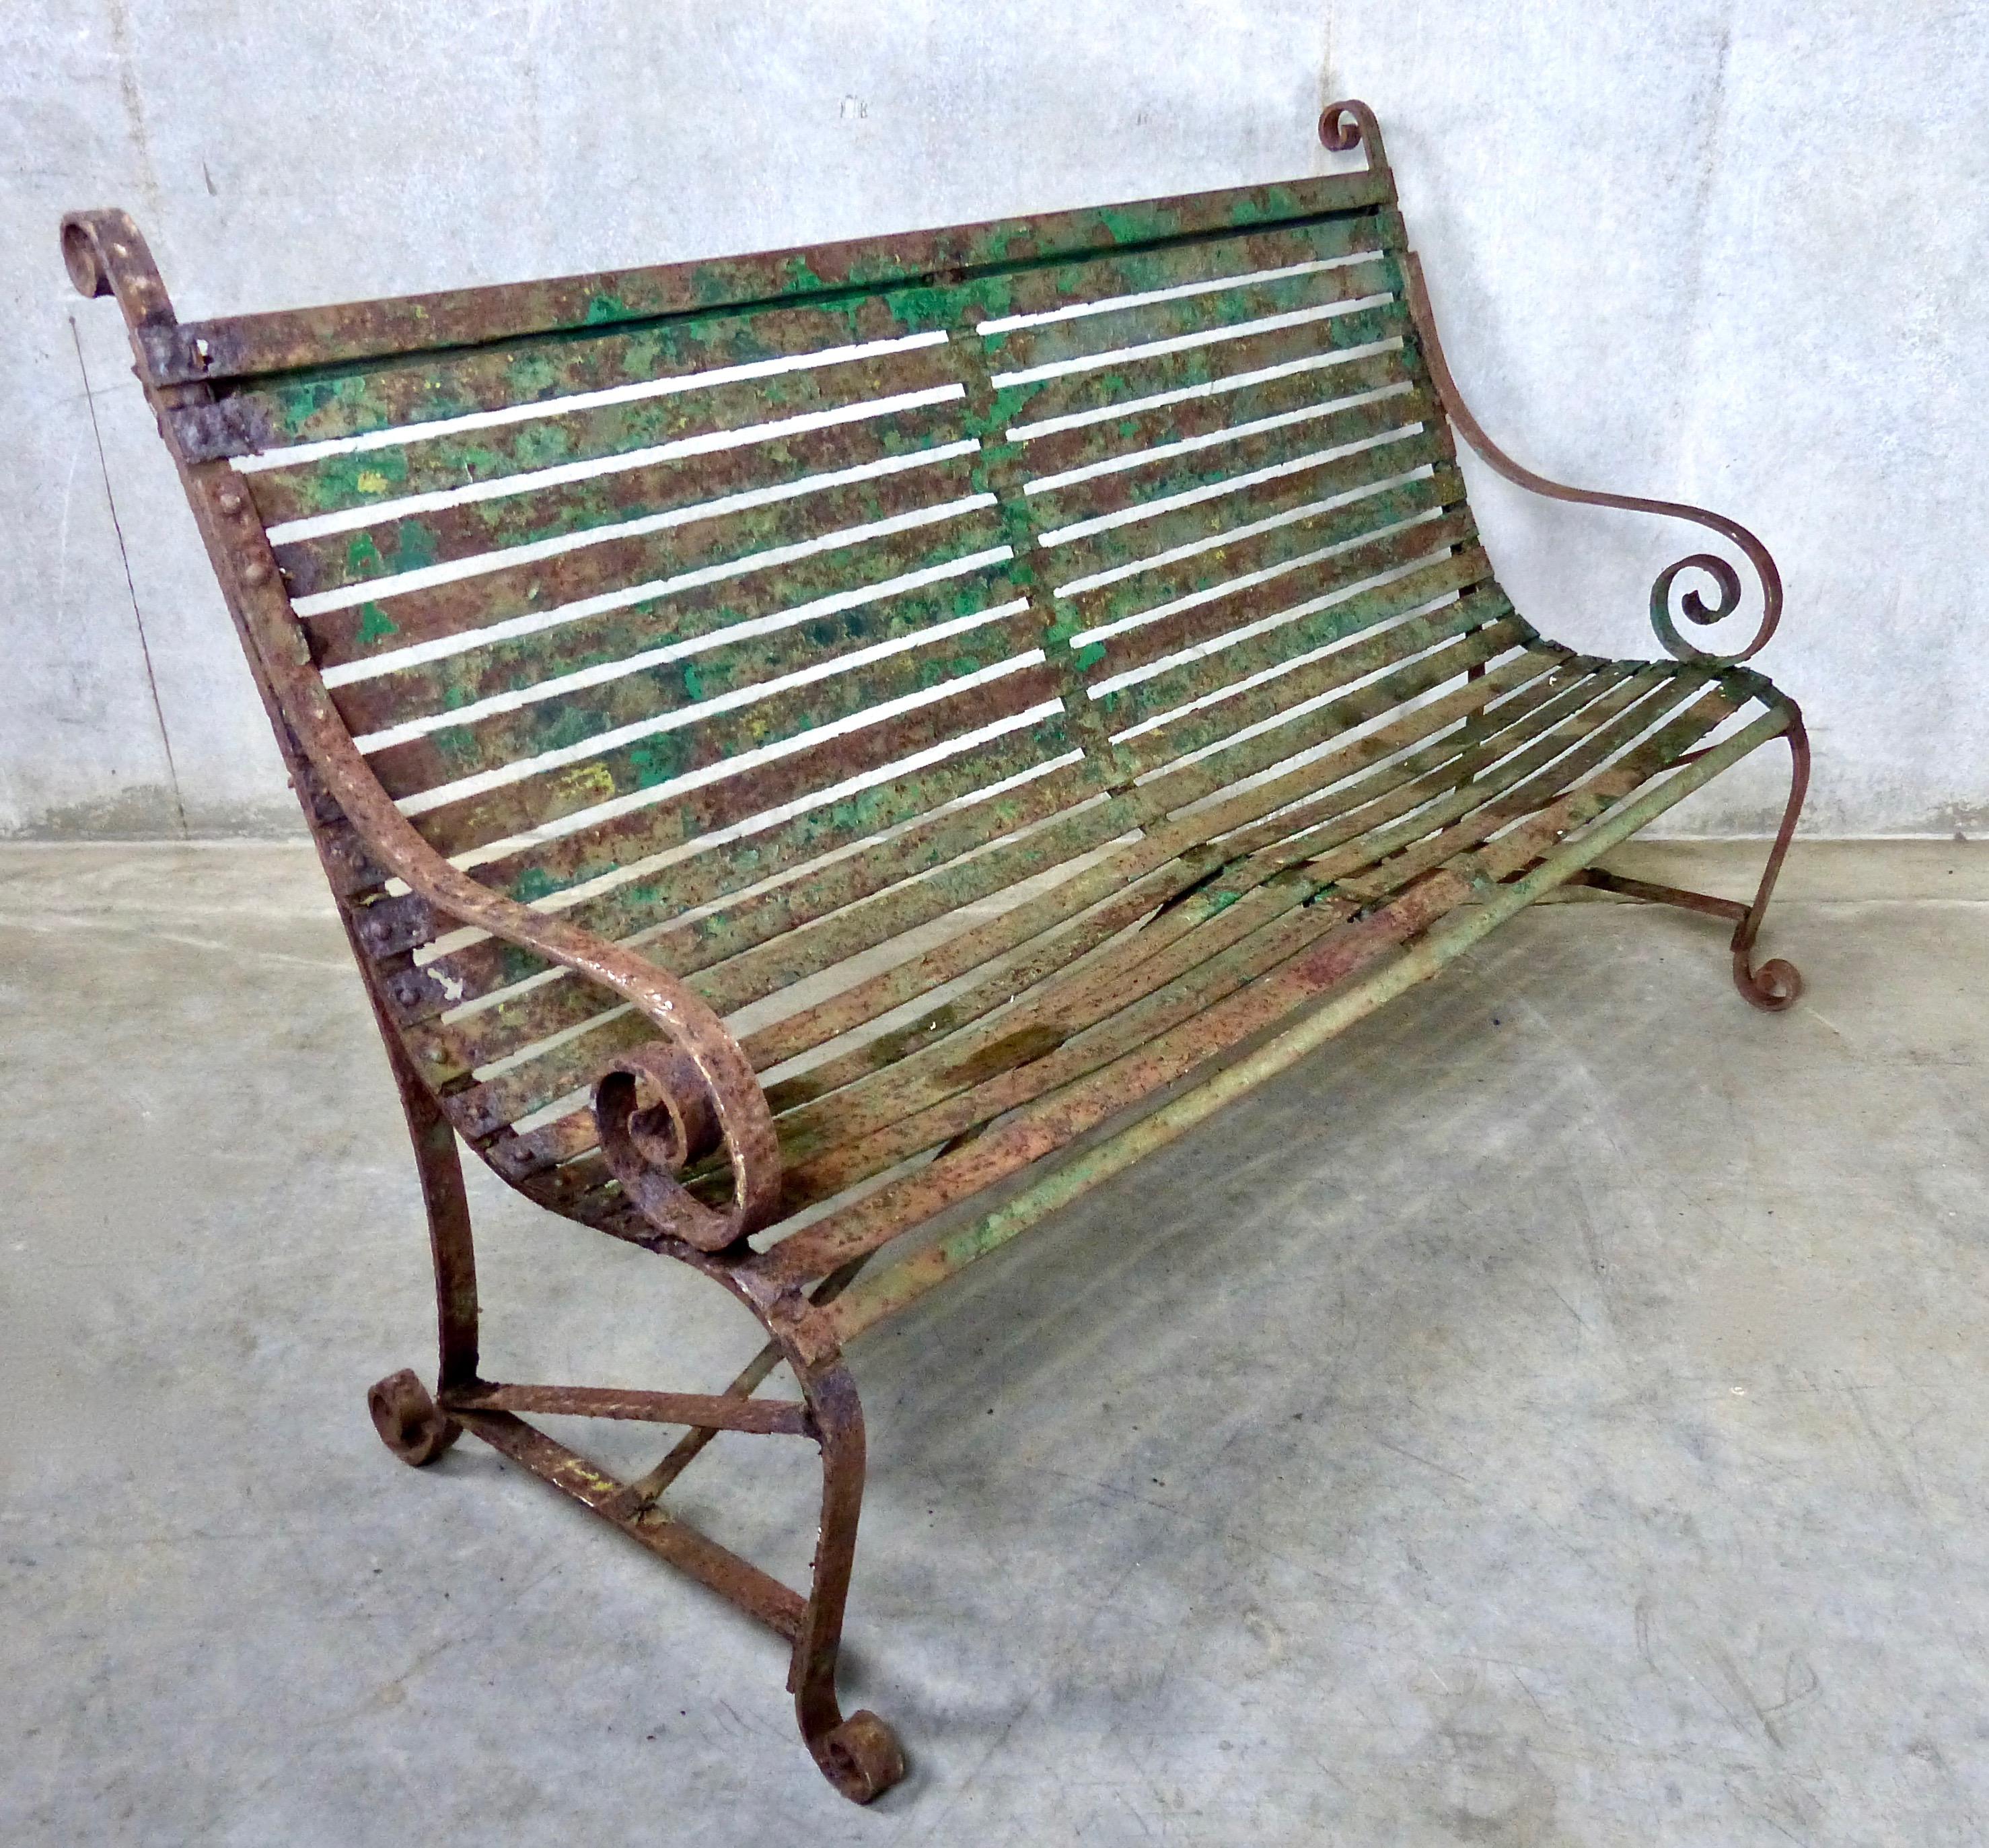 Lovely scrollwork and other decorative details on this antique French garden bench made from forged iron. Retains some of its original green paint for an attractive distressed look.